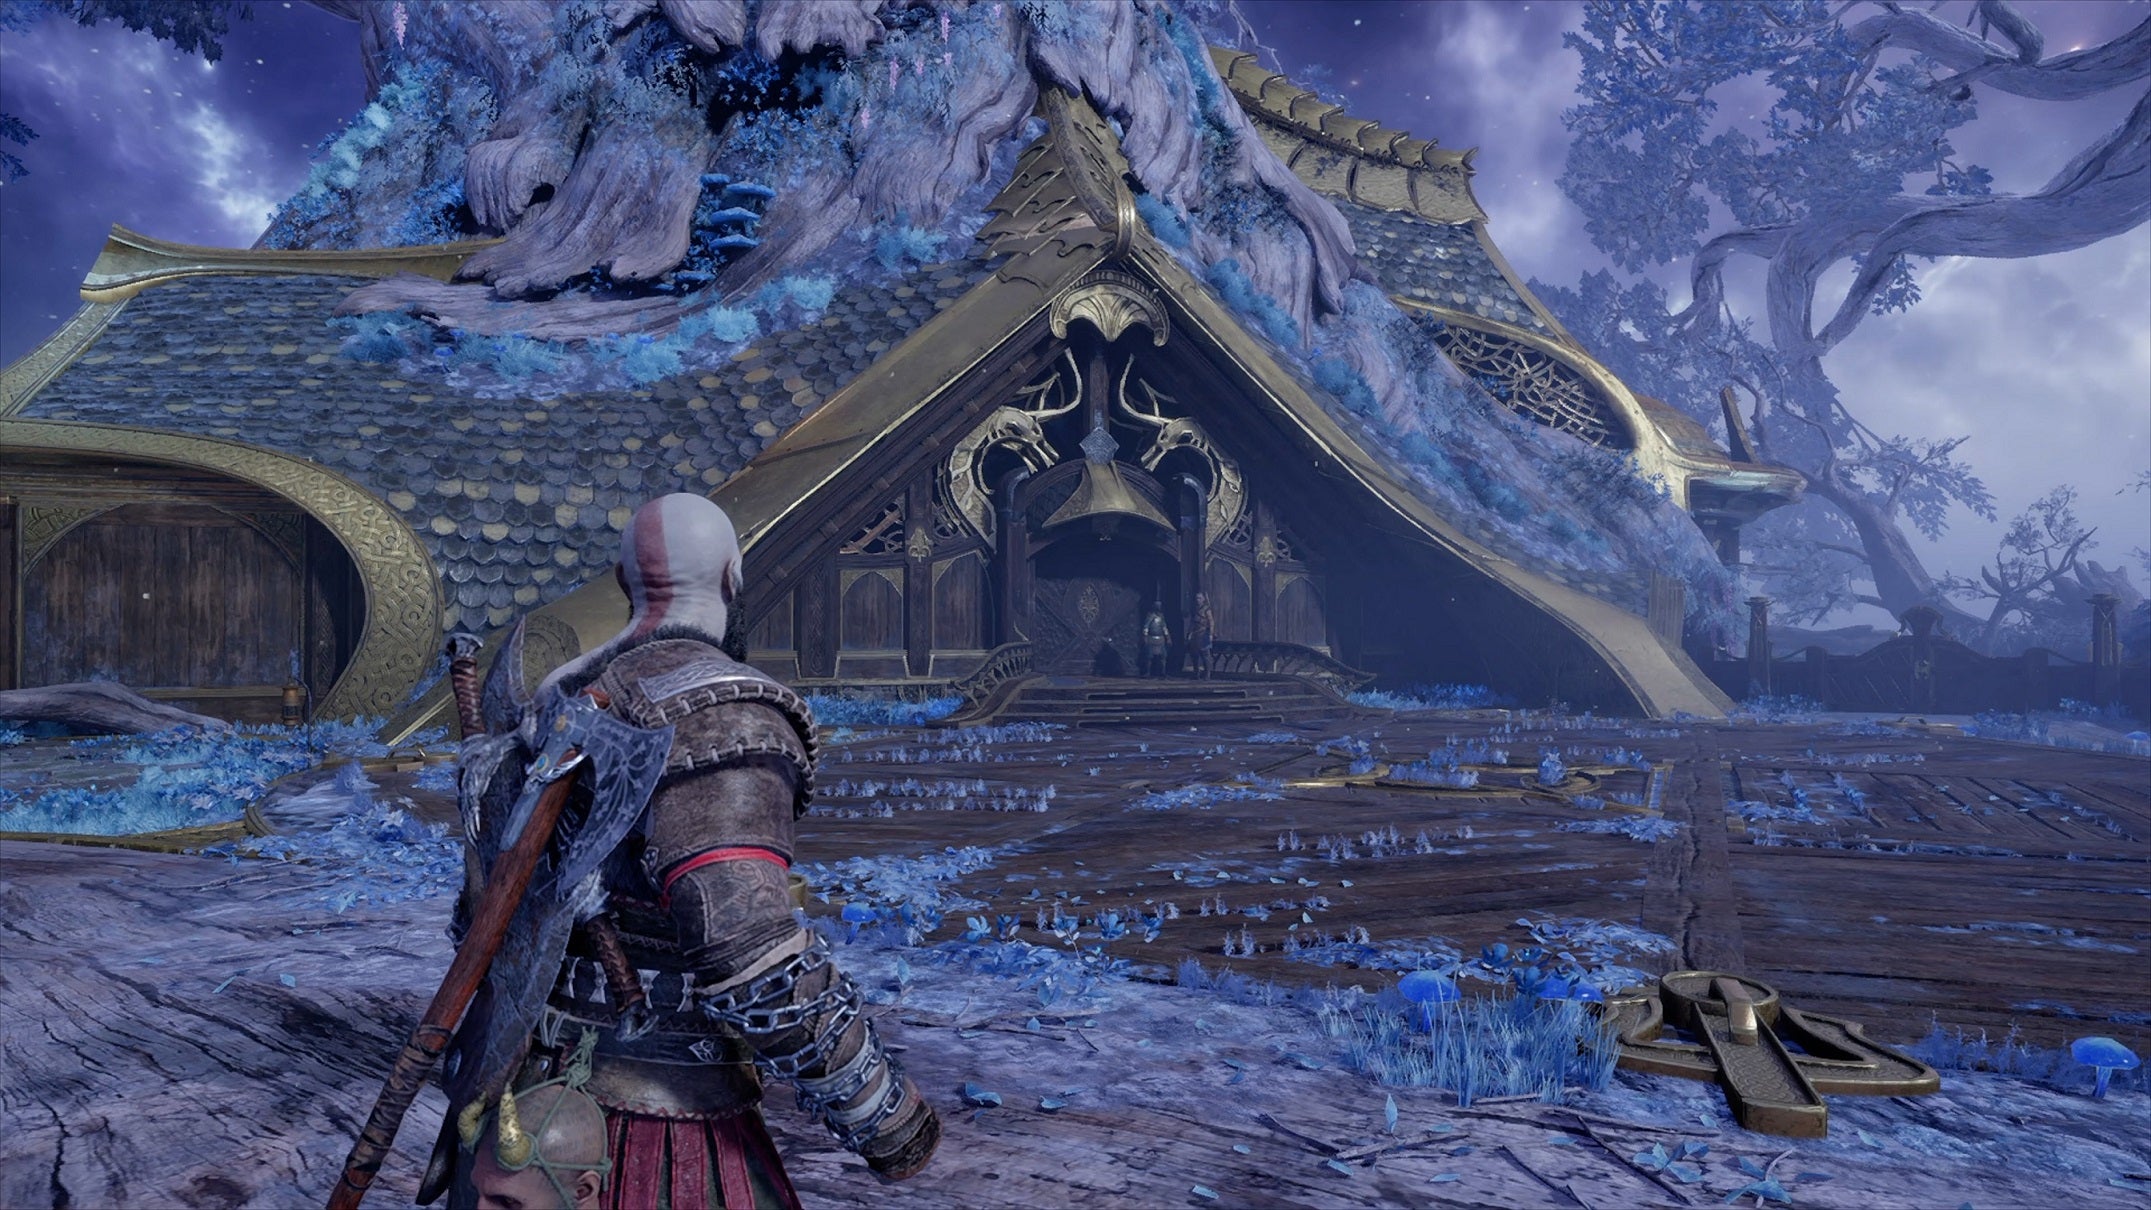 Kratos looks at an strange house in the forest in the PS4 version of God of War Ragnarok